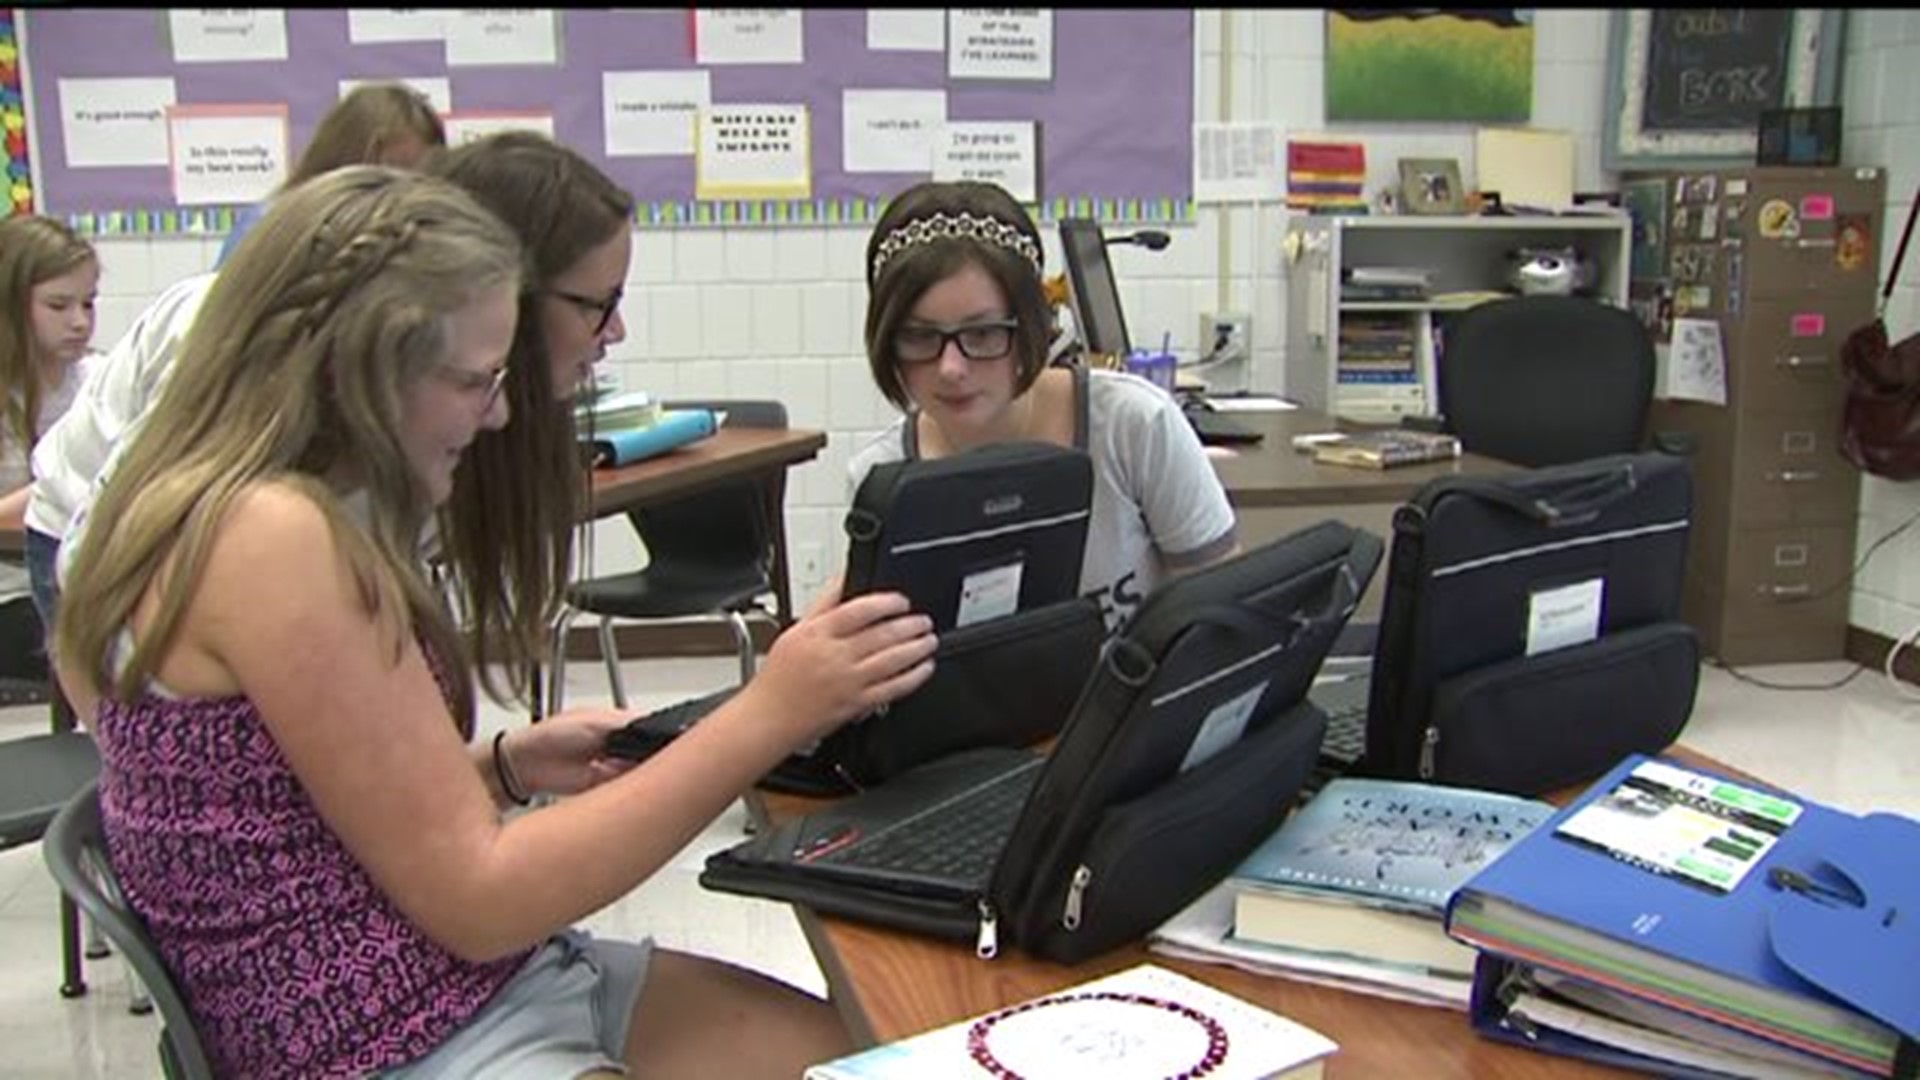 Online programs and apps help North Scott parents keep tabs on their students